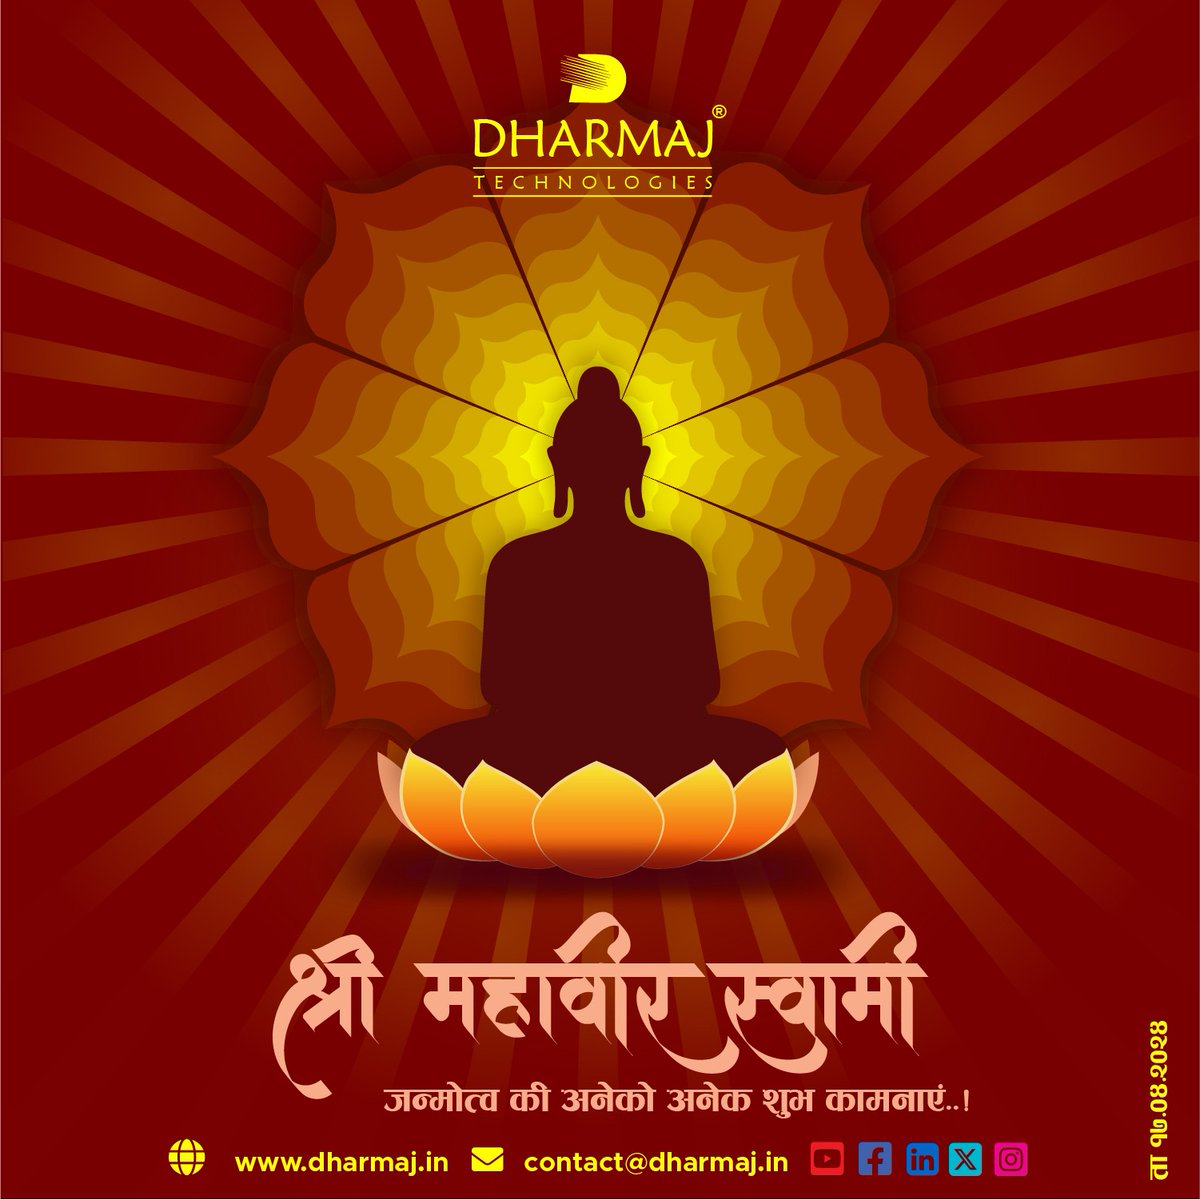 'There is no enemy out of your soul. The real enemies live inside yourself, they are anger, pride, greed, attachments, and hate.' 

#MahavirJayanti  #Dharmajtechnologies #diamondindustry #labgrowndiamond #laserdiamondcuttingmachine #Lasersawing #Laserdiamondprocessing #CVD